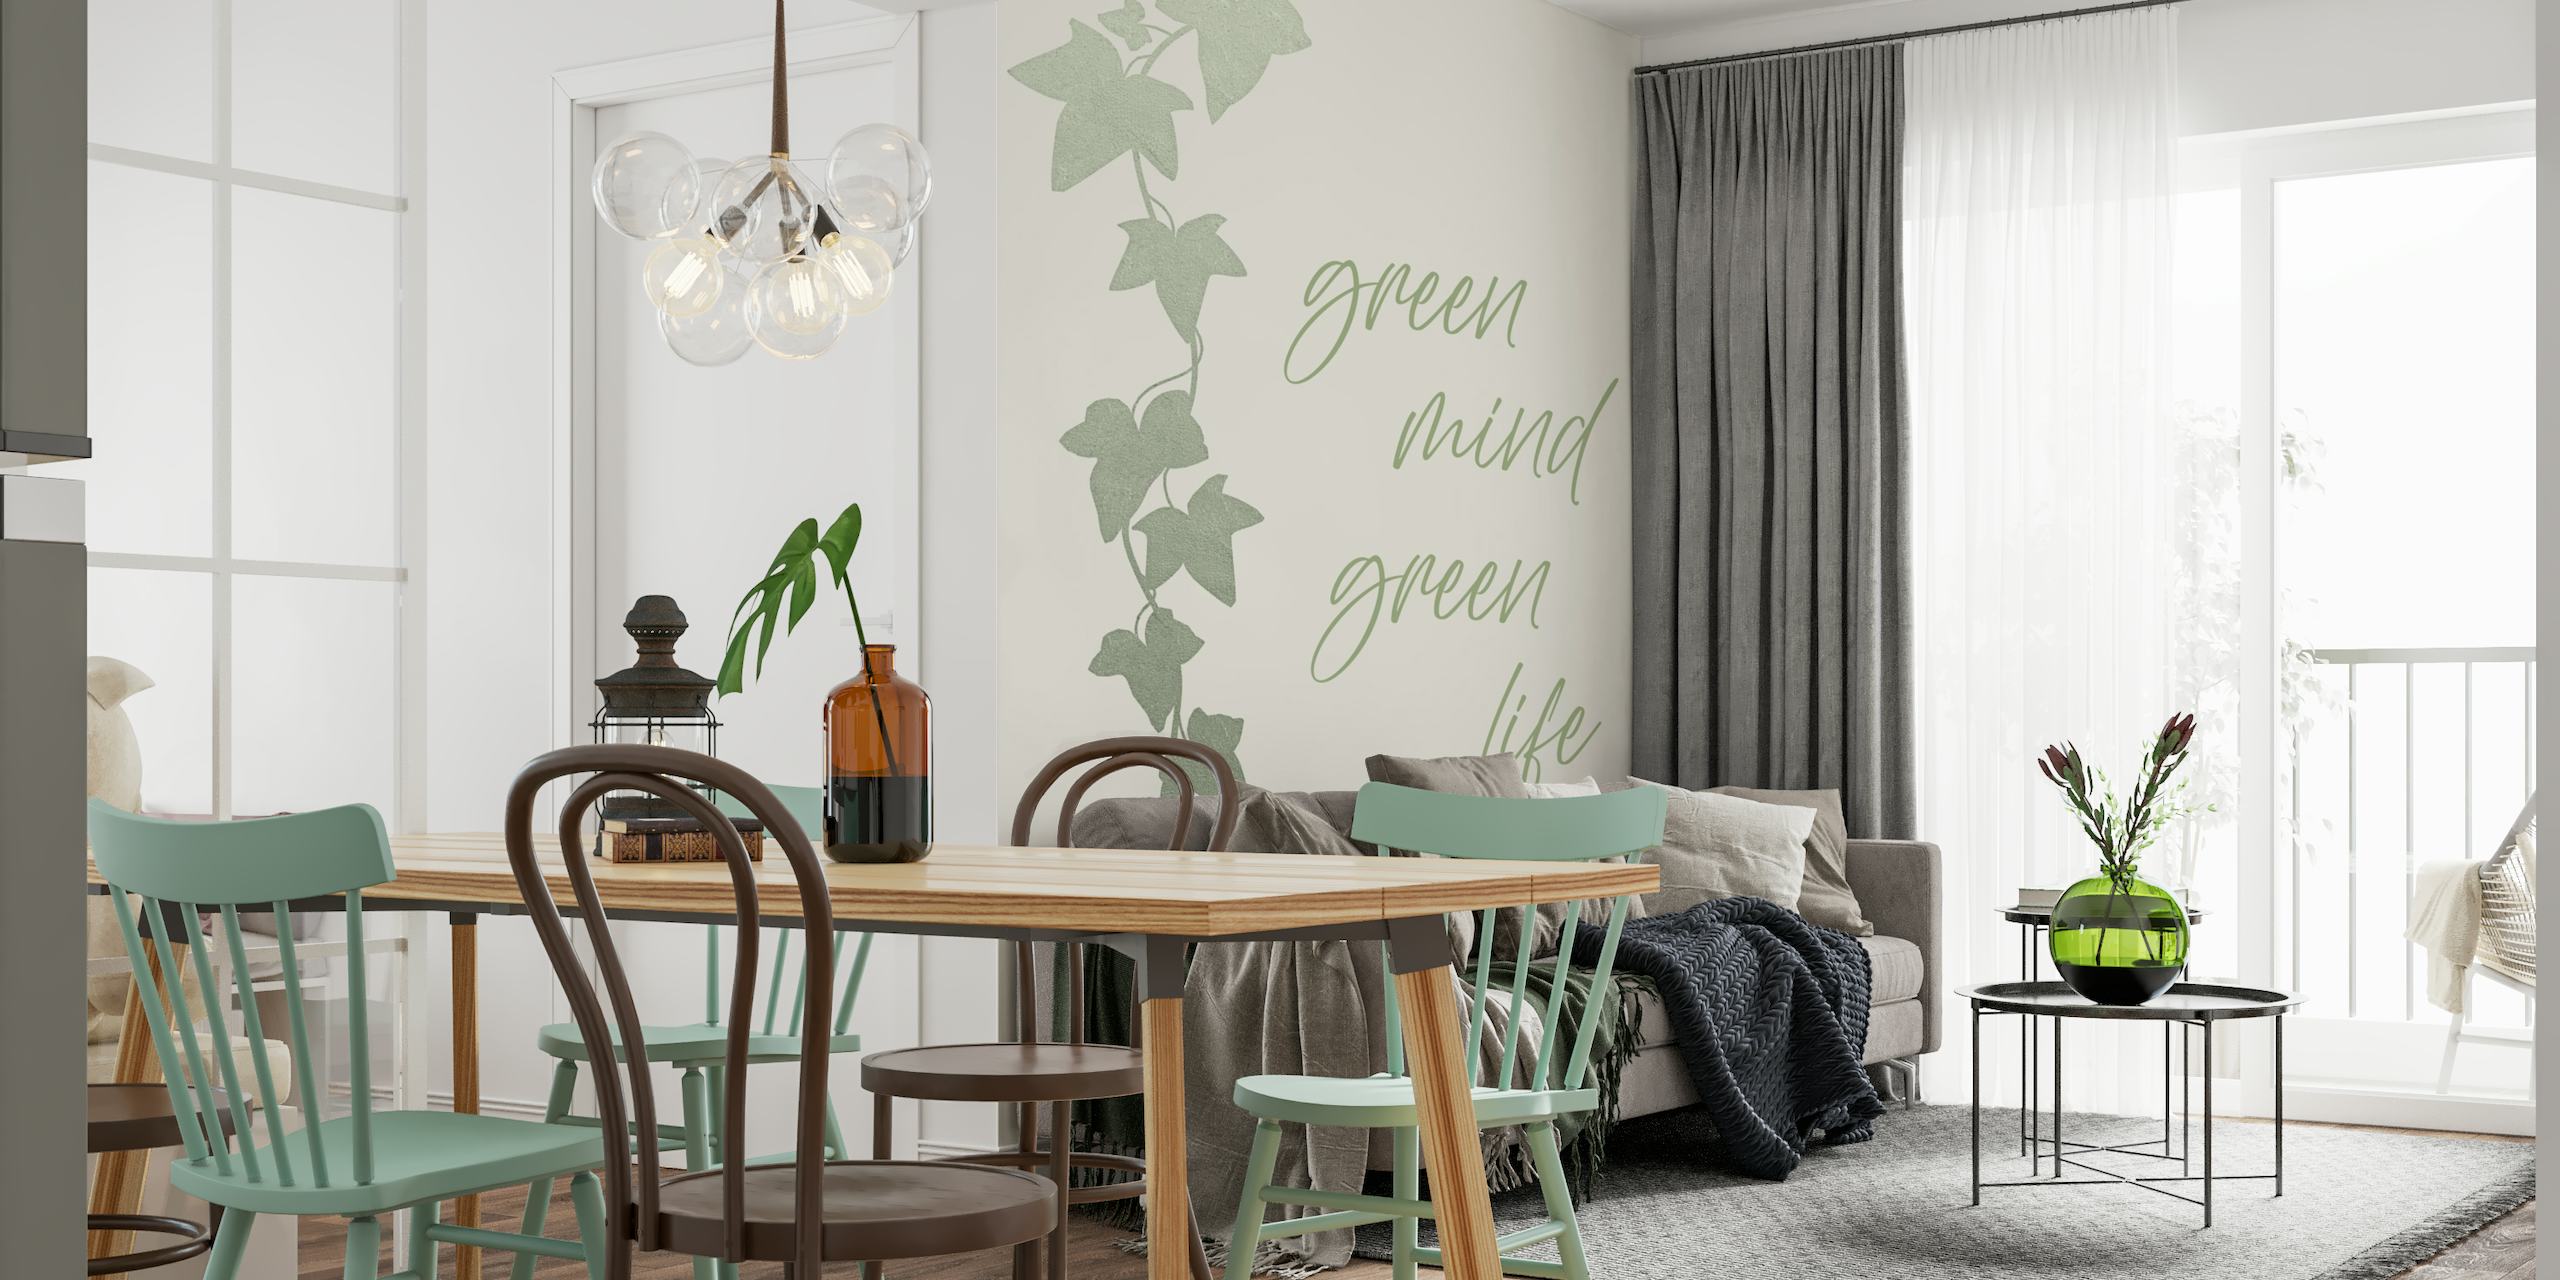 Green ivy leaves wall mural with 'Green mind - Green life' script